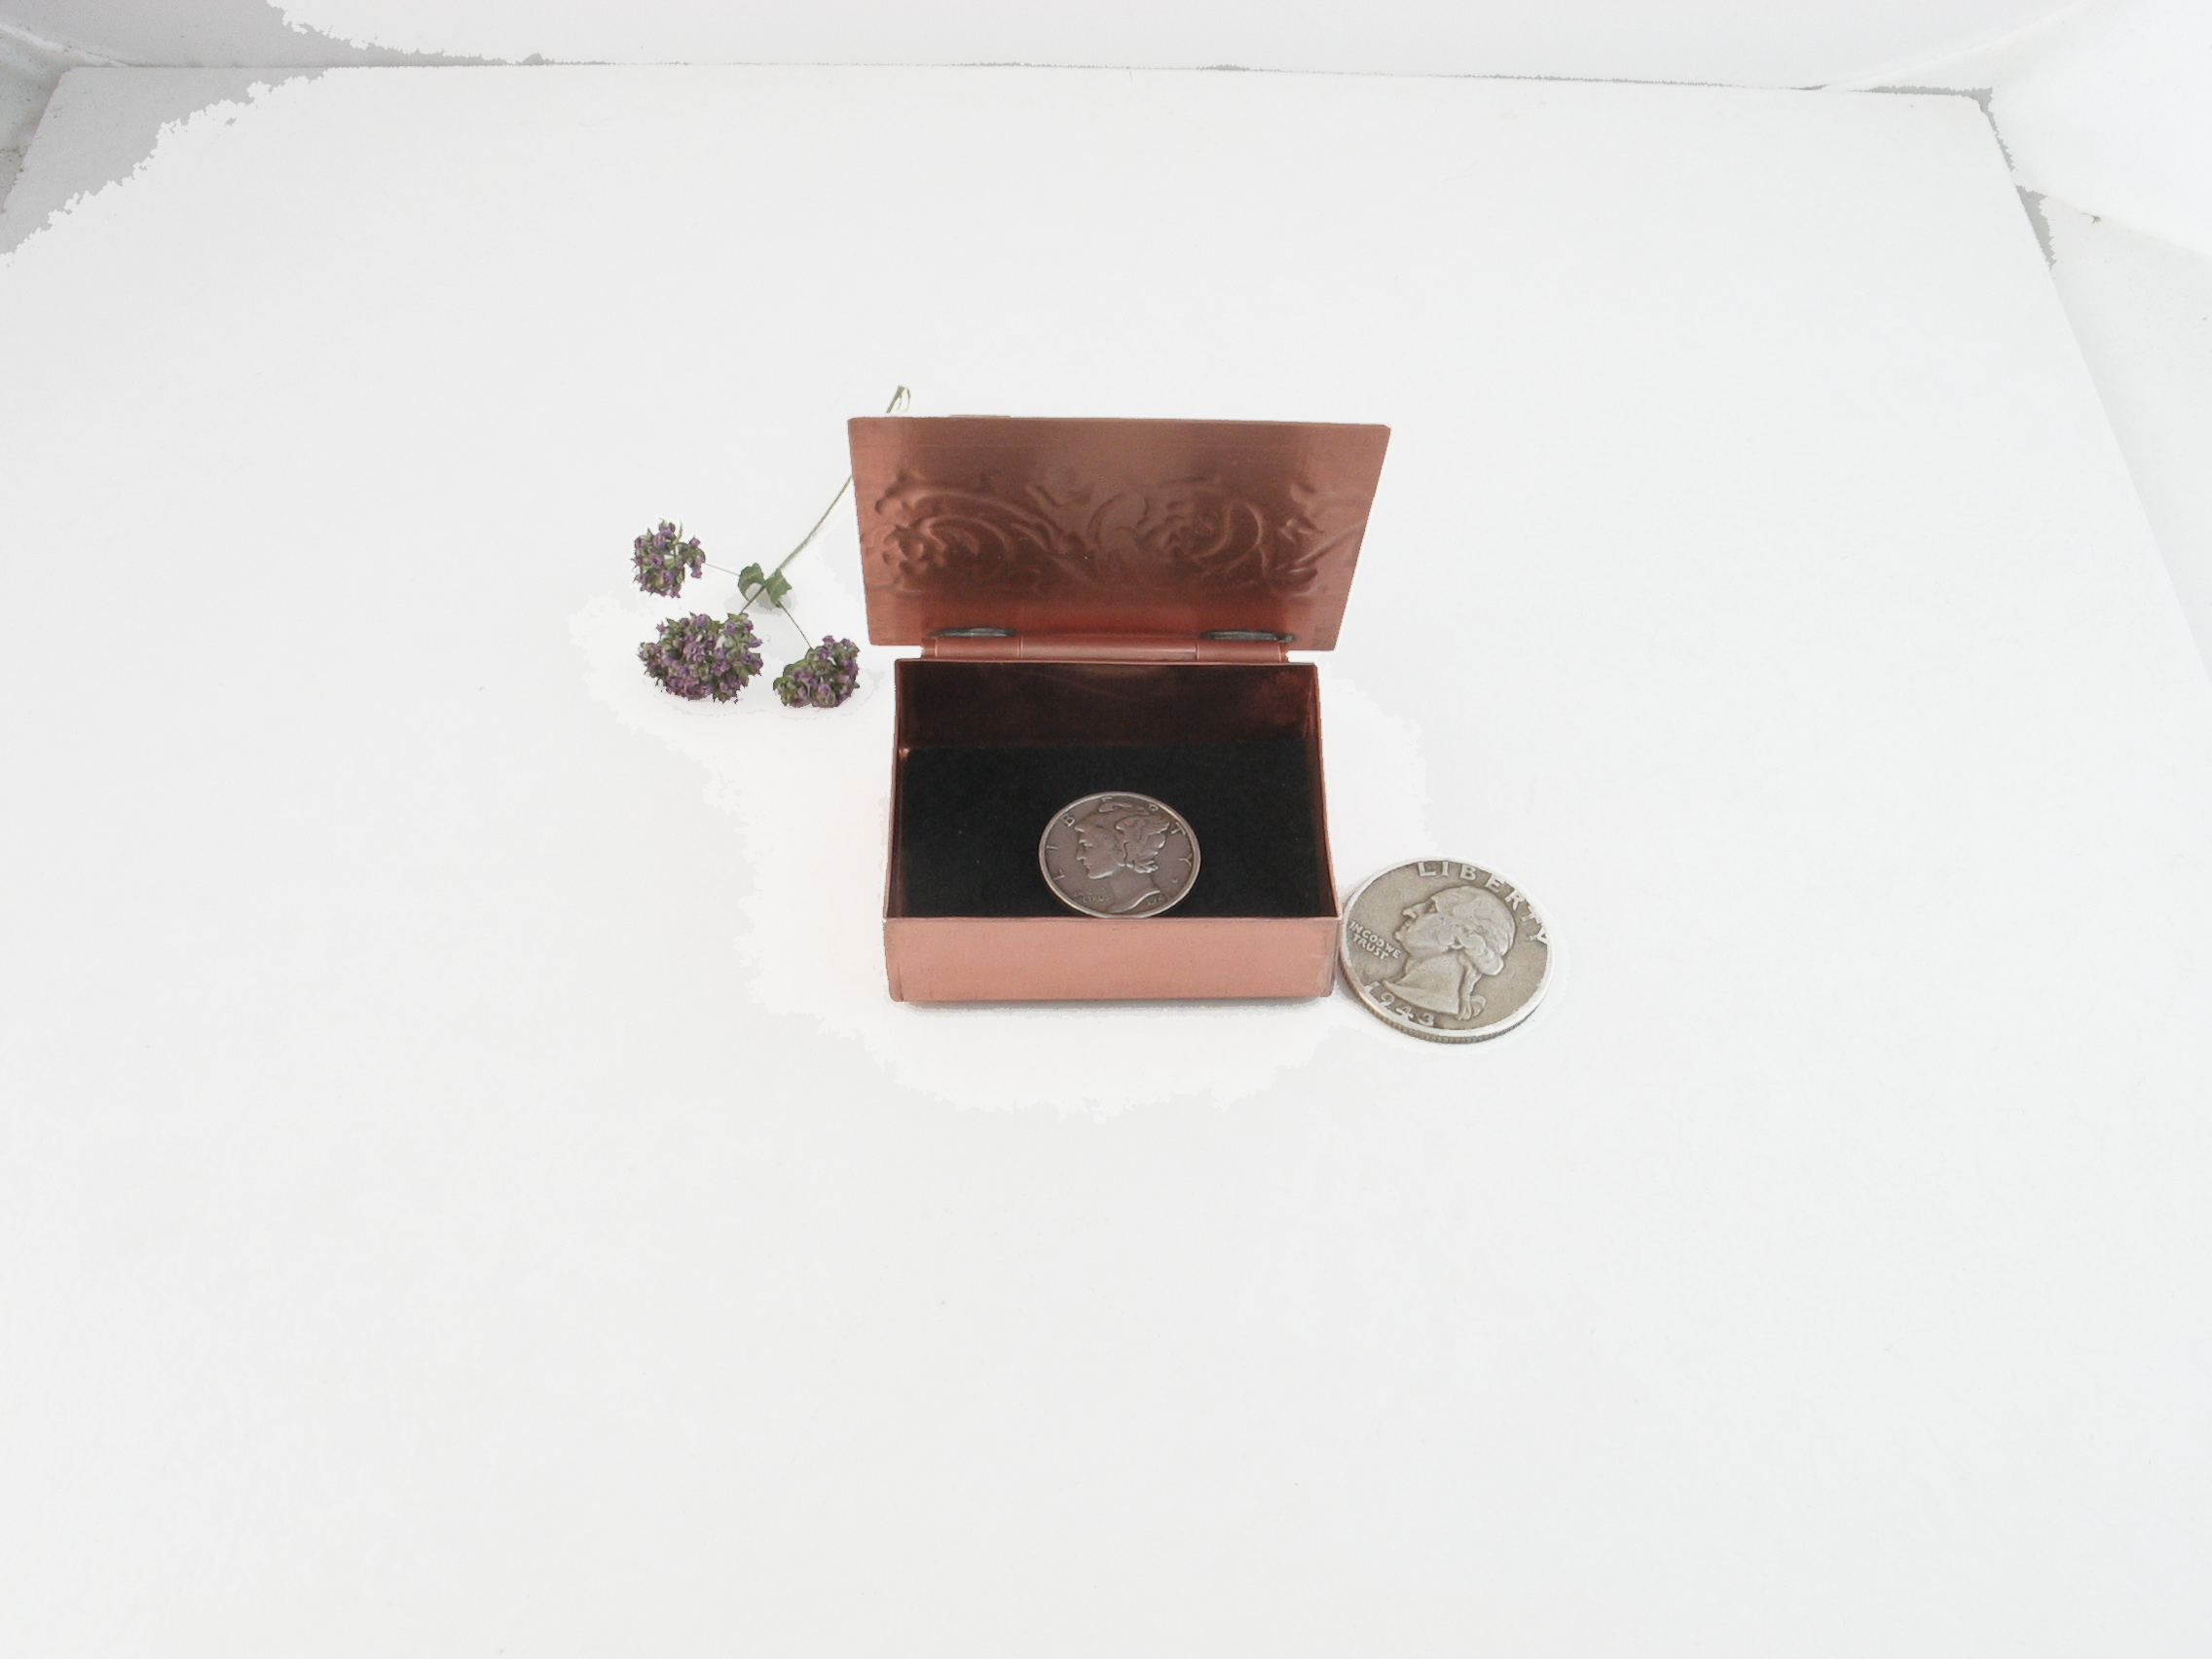 inside of tiny trinket box showing black felt lining and size related to dime and quarter